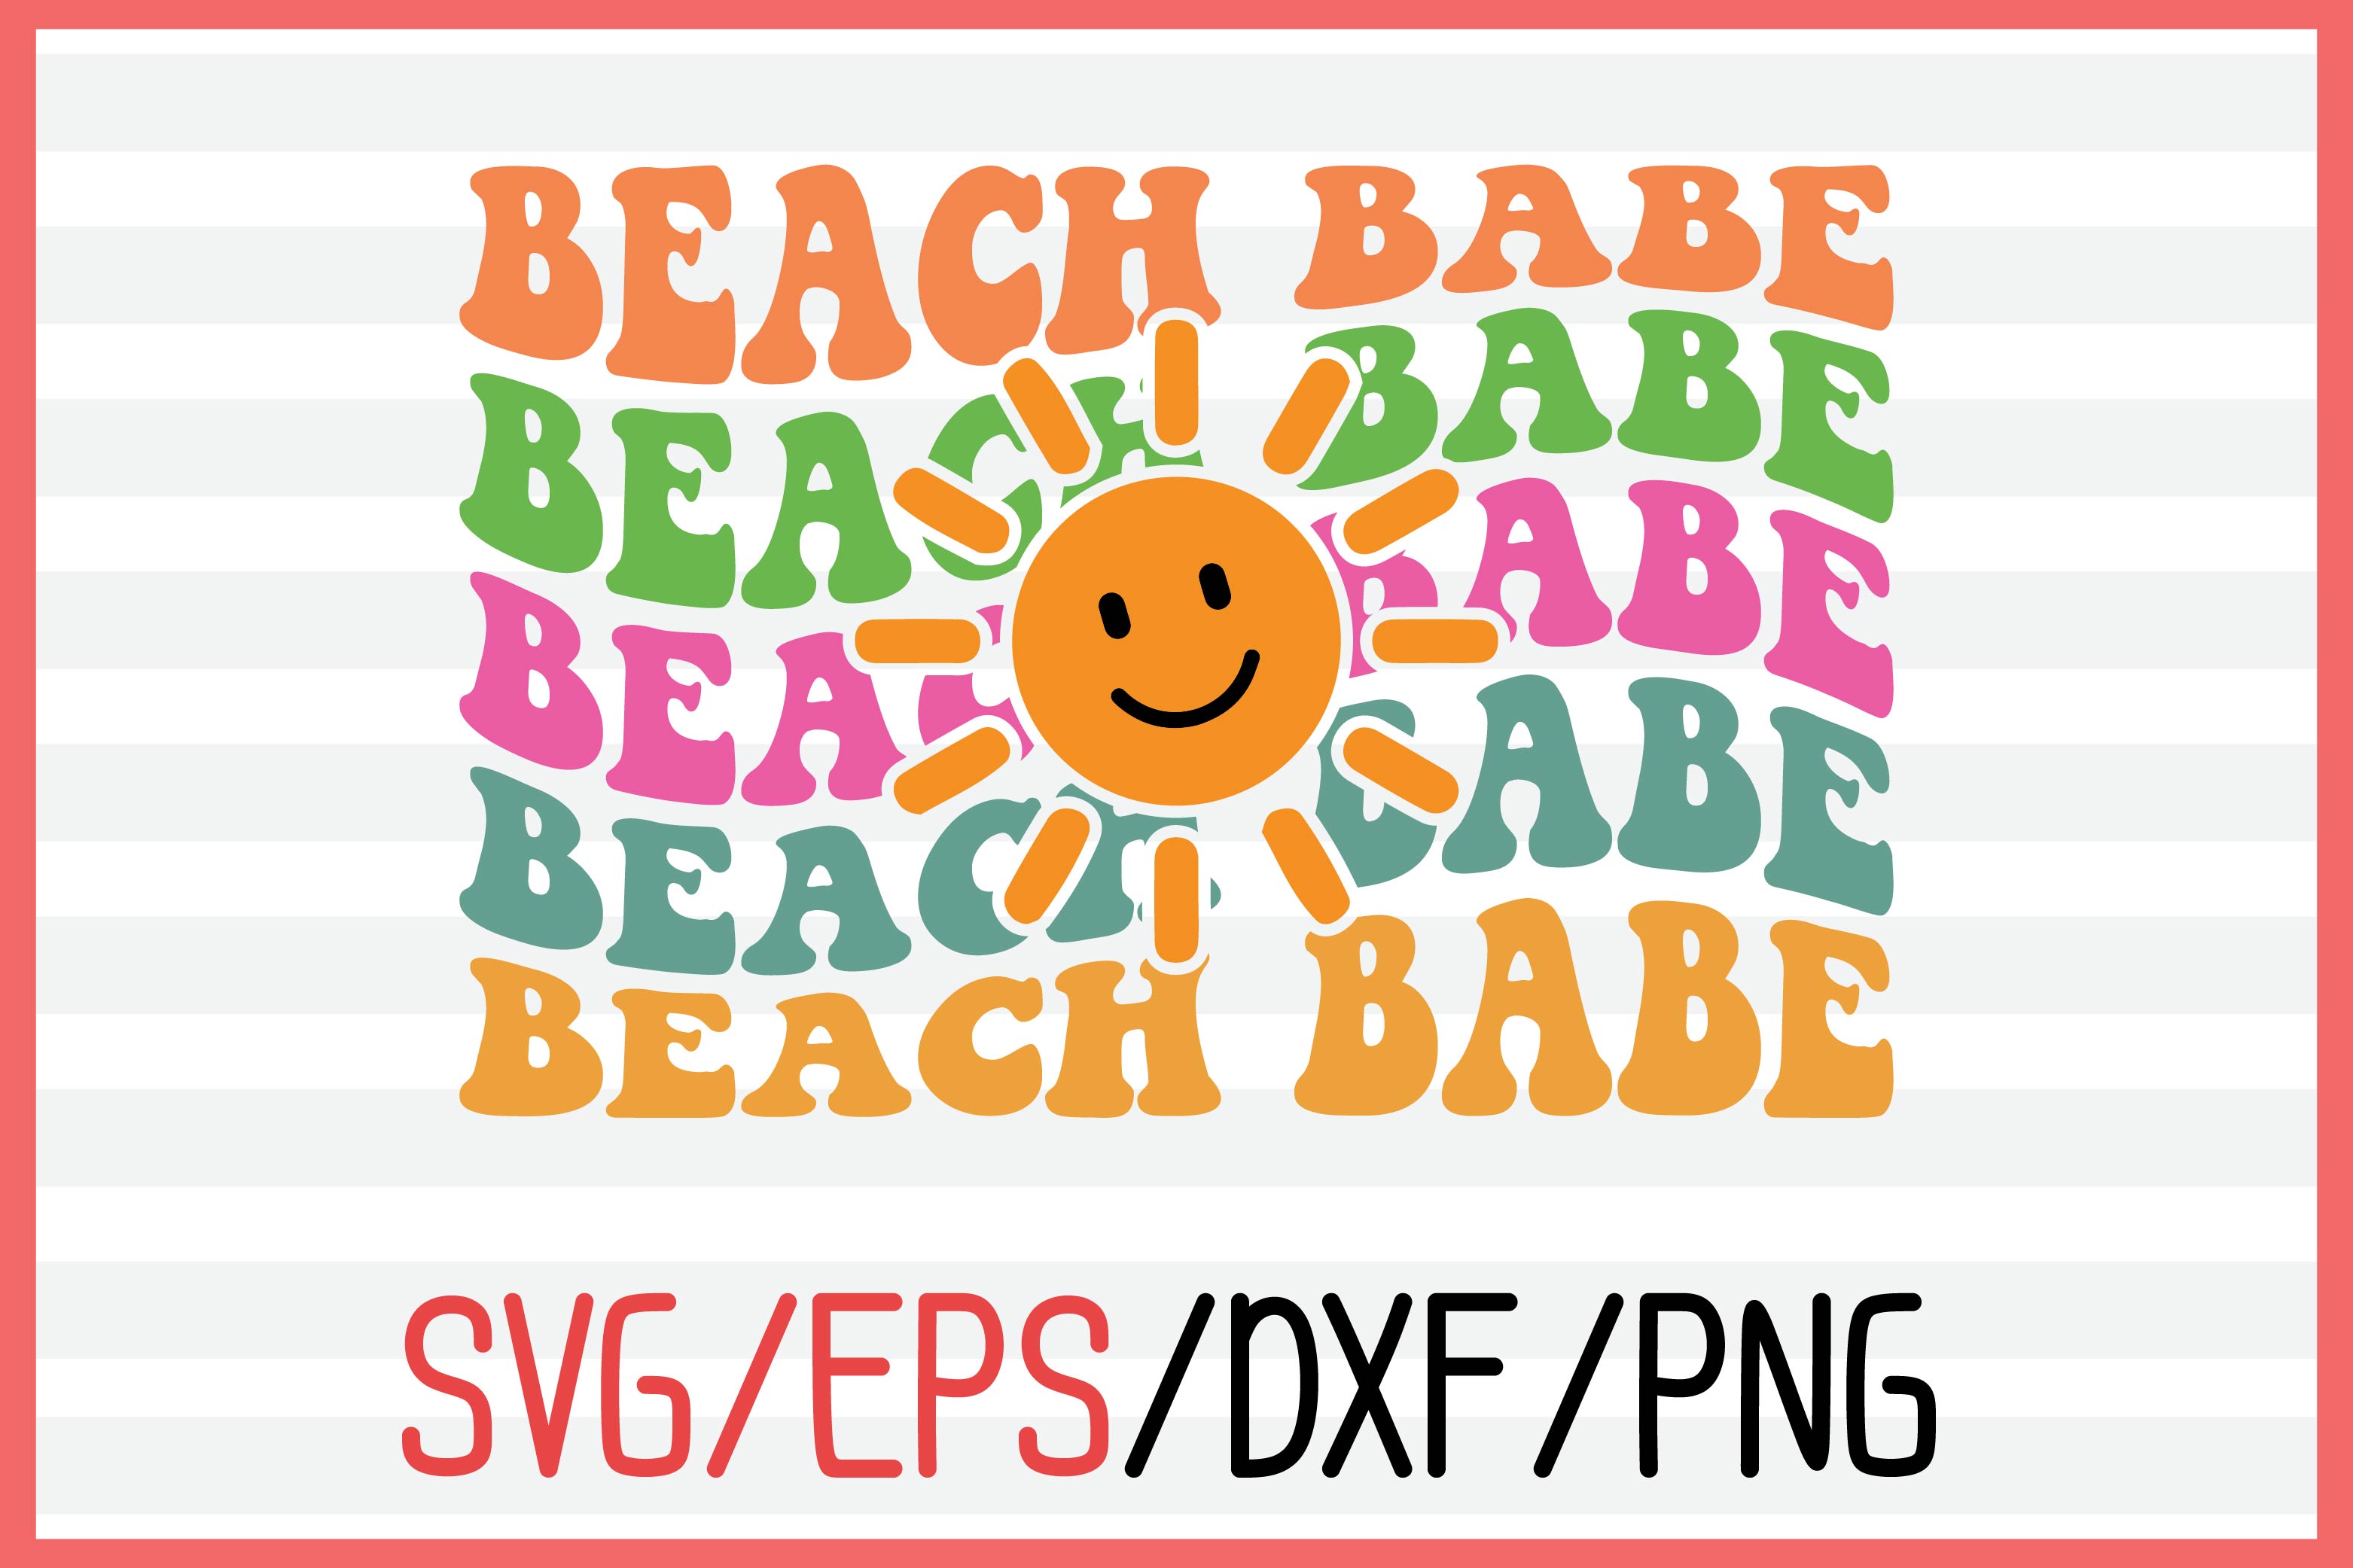 About beach babe retro svg design pinterest preview image.